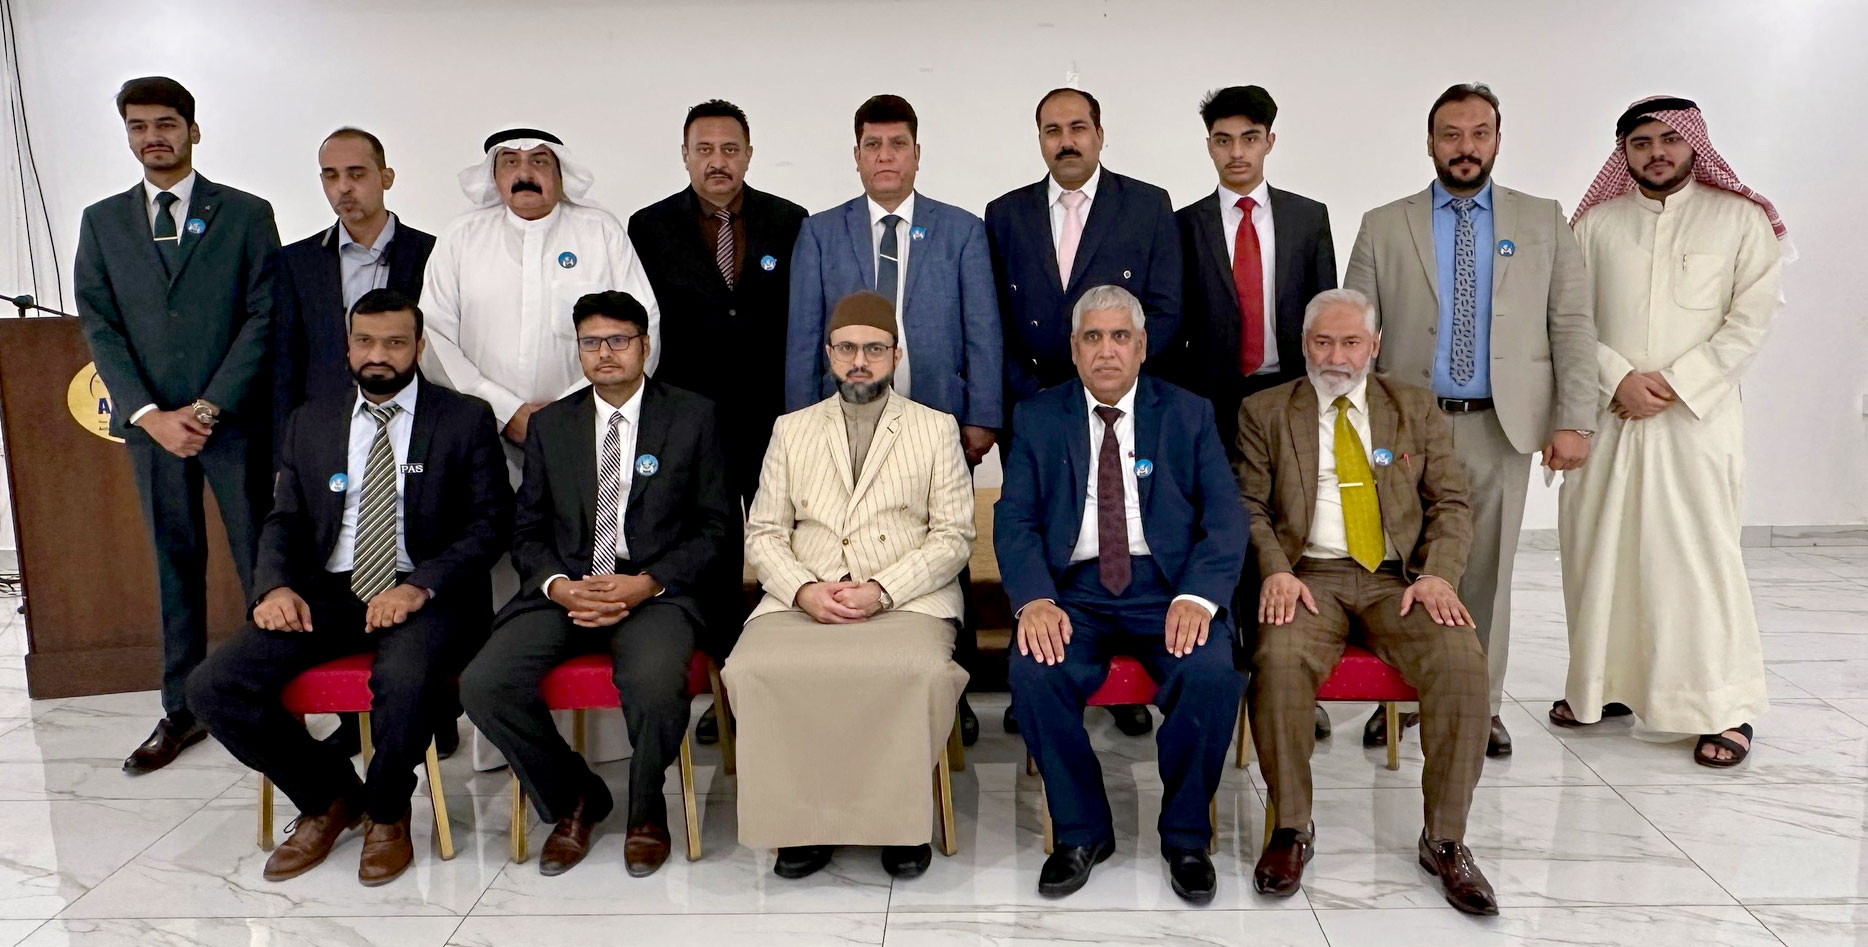 Dr Hassan Qadri addressing to foreign ambassadors on topic of constitution of Madinah in Kuwait